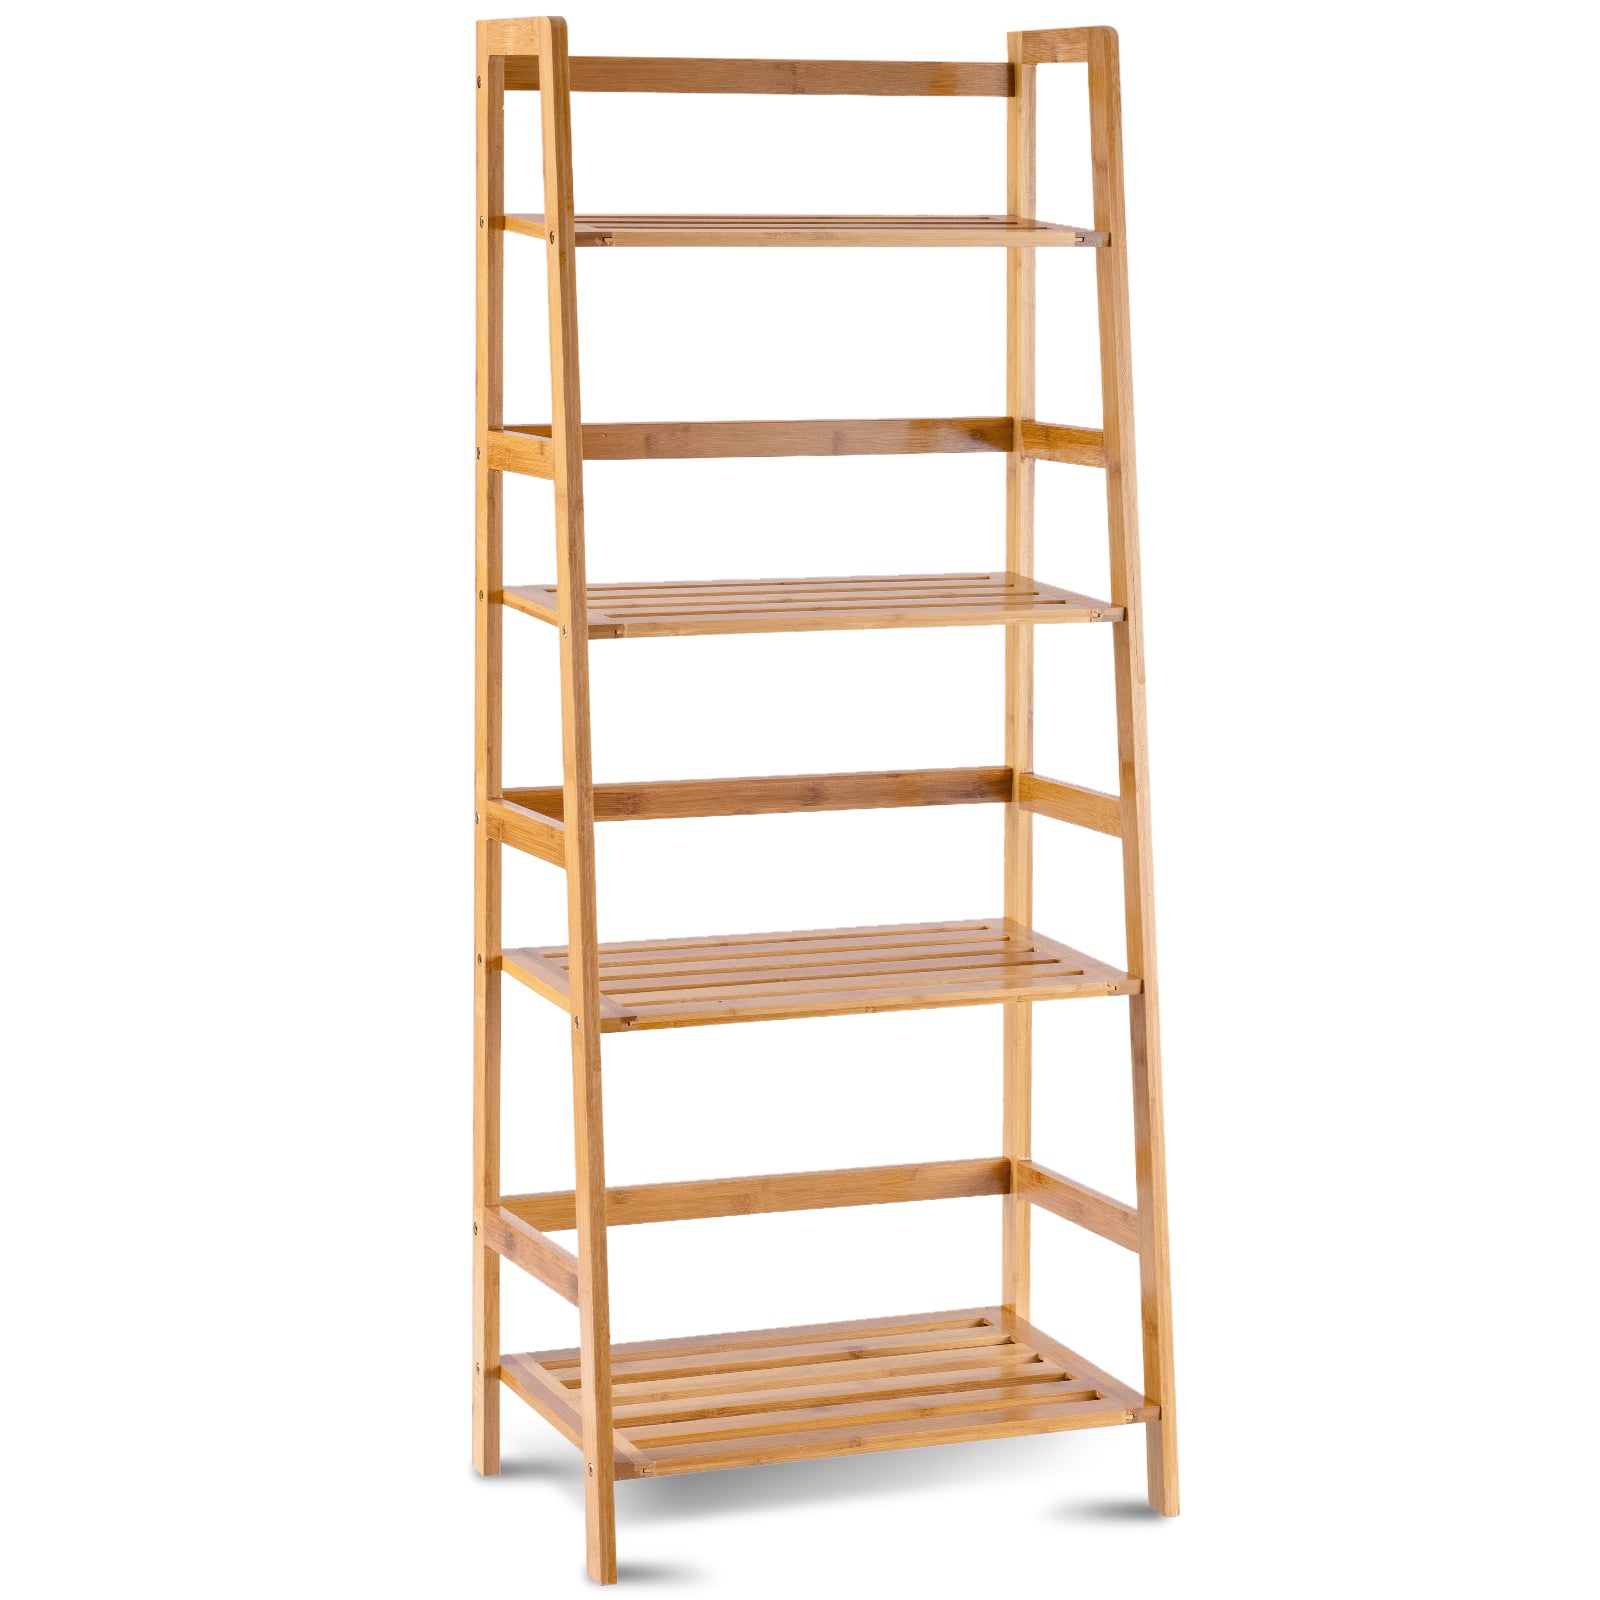 4 Tier Bamboo Plant Stand with Rear Bar and Slatted Tier Design 